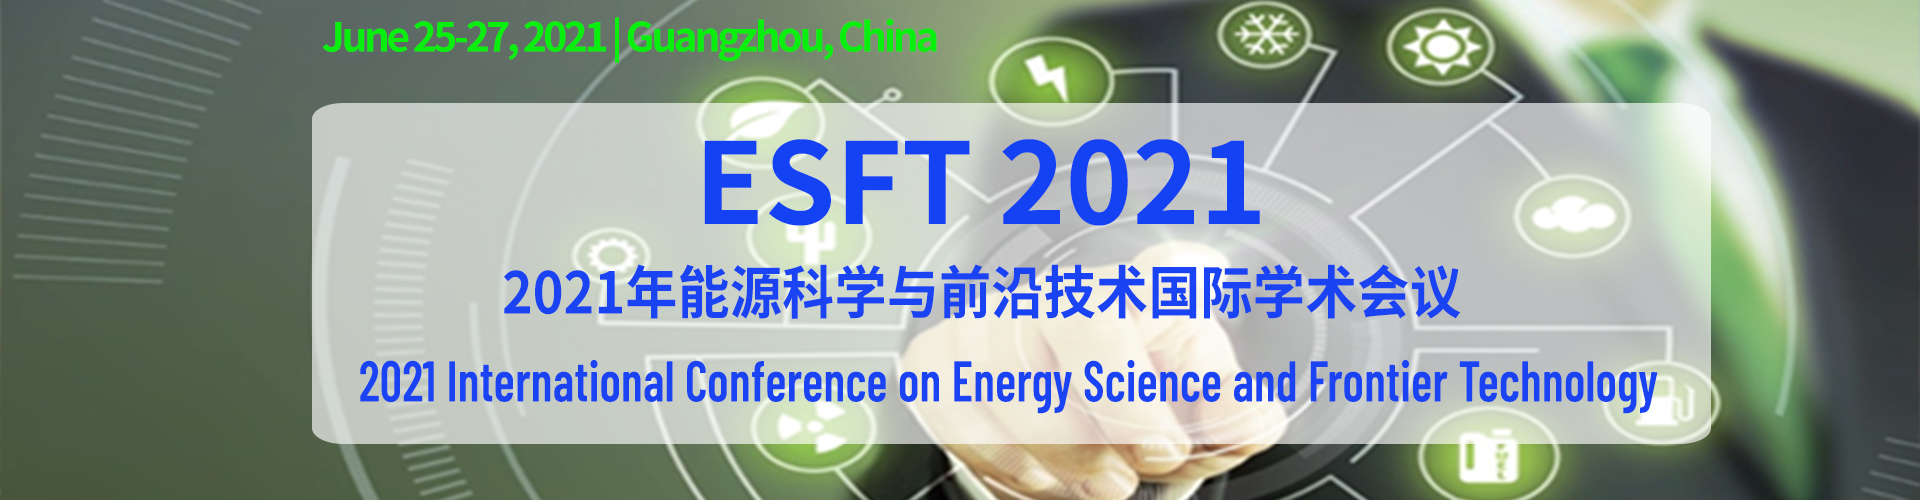 2021 International Conference on Energy Science and Frontier Technology (ESFT 2021), Guangzhou, Guangdong, China